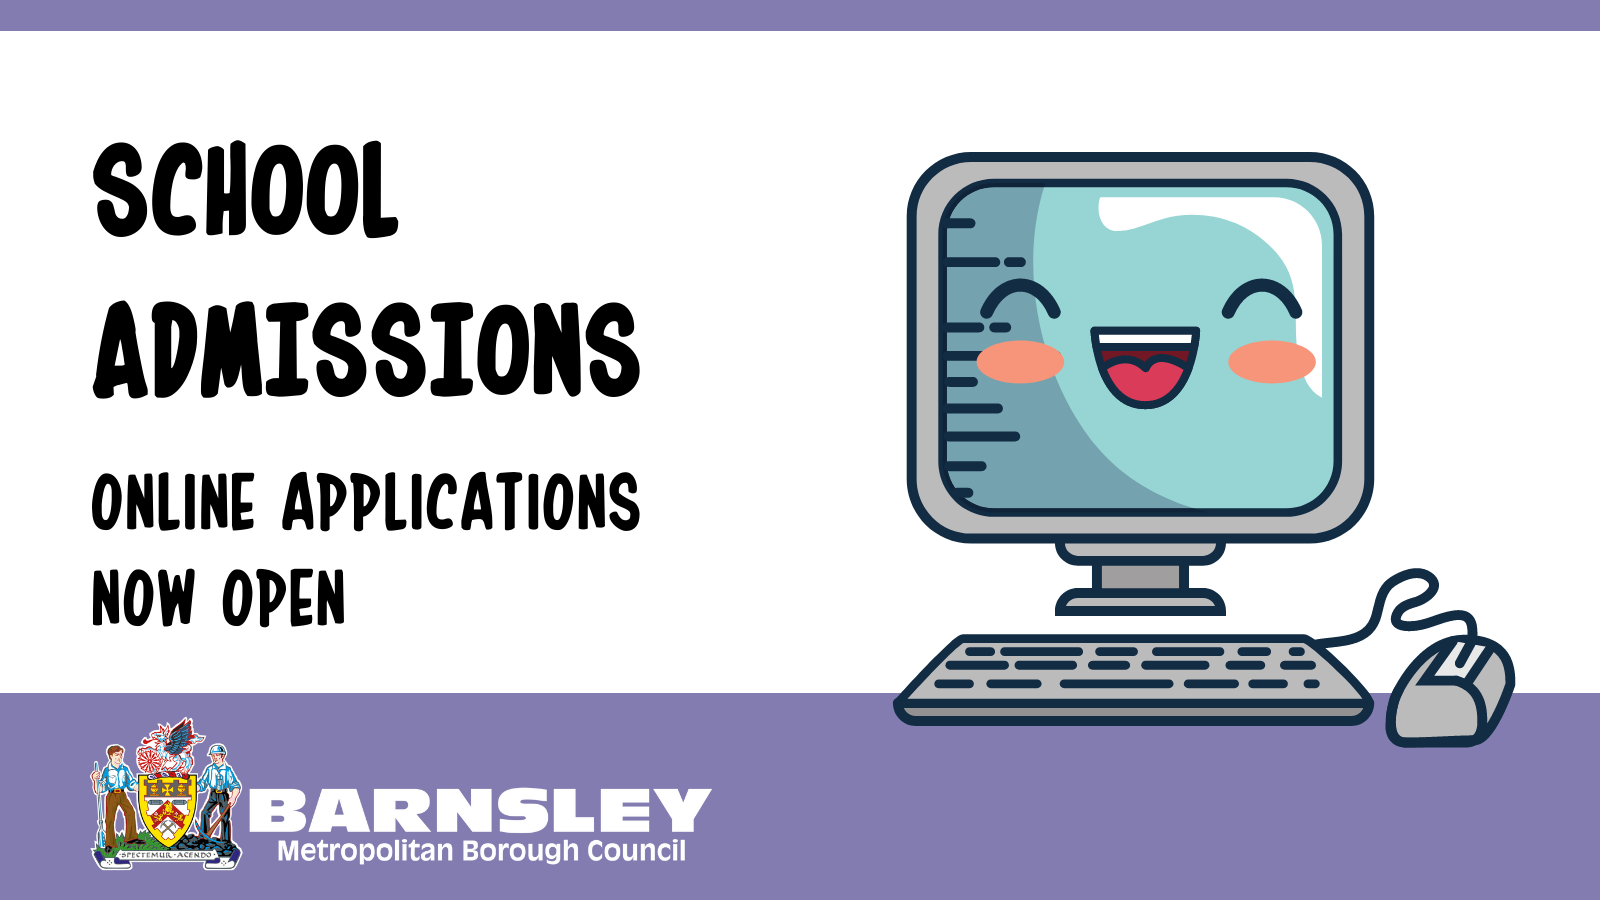 Schools admissions - online applications now open